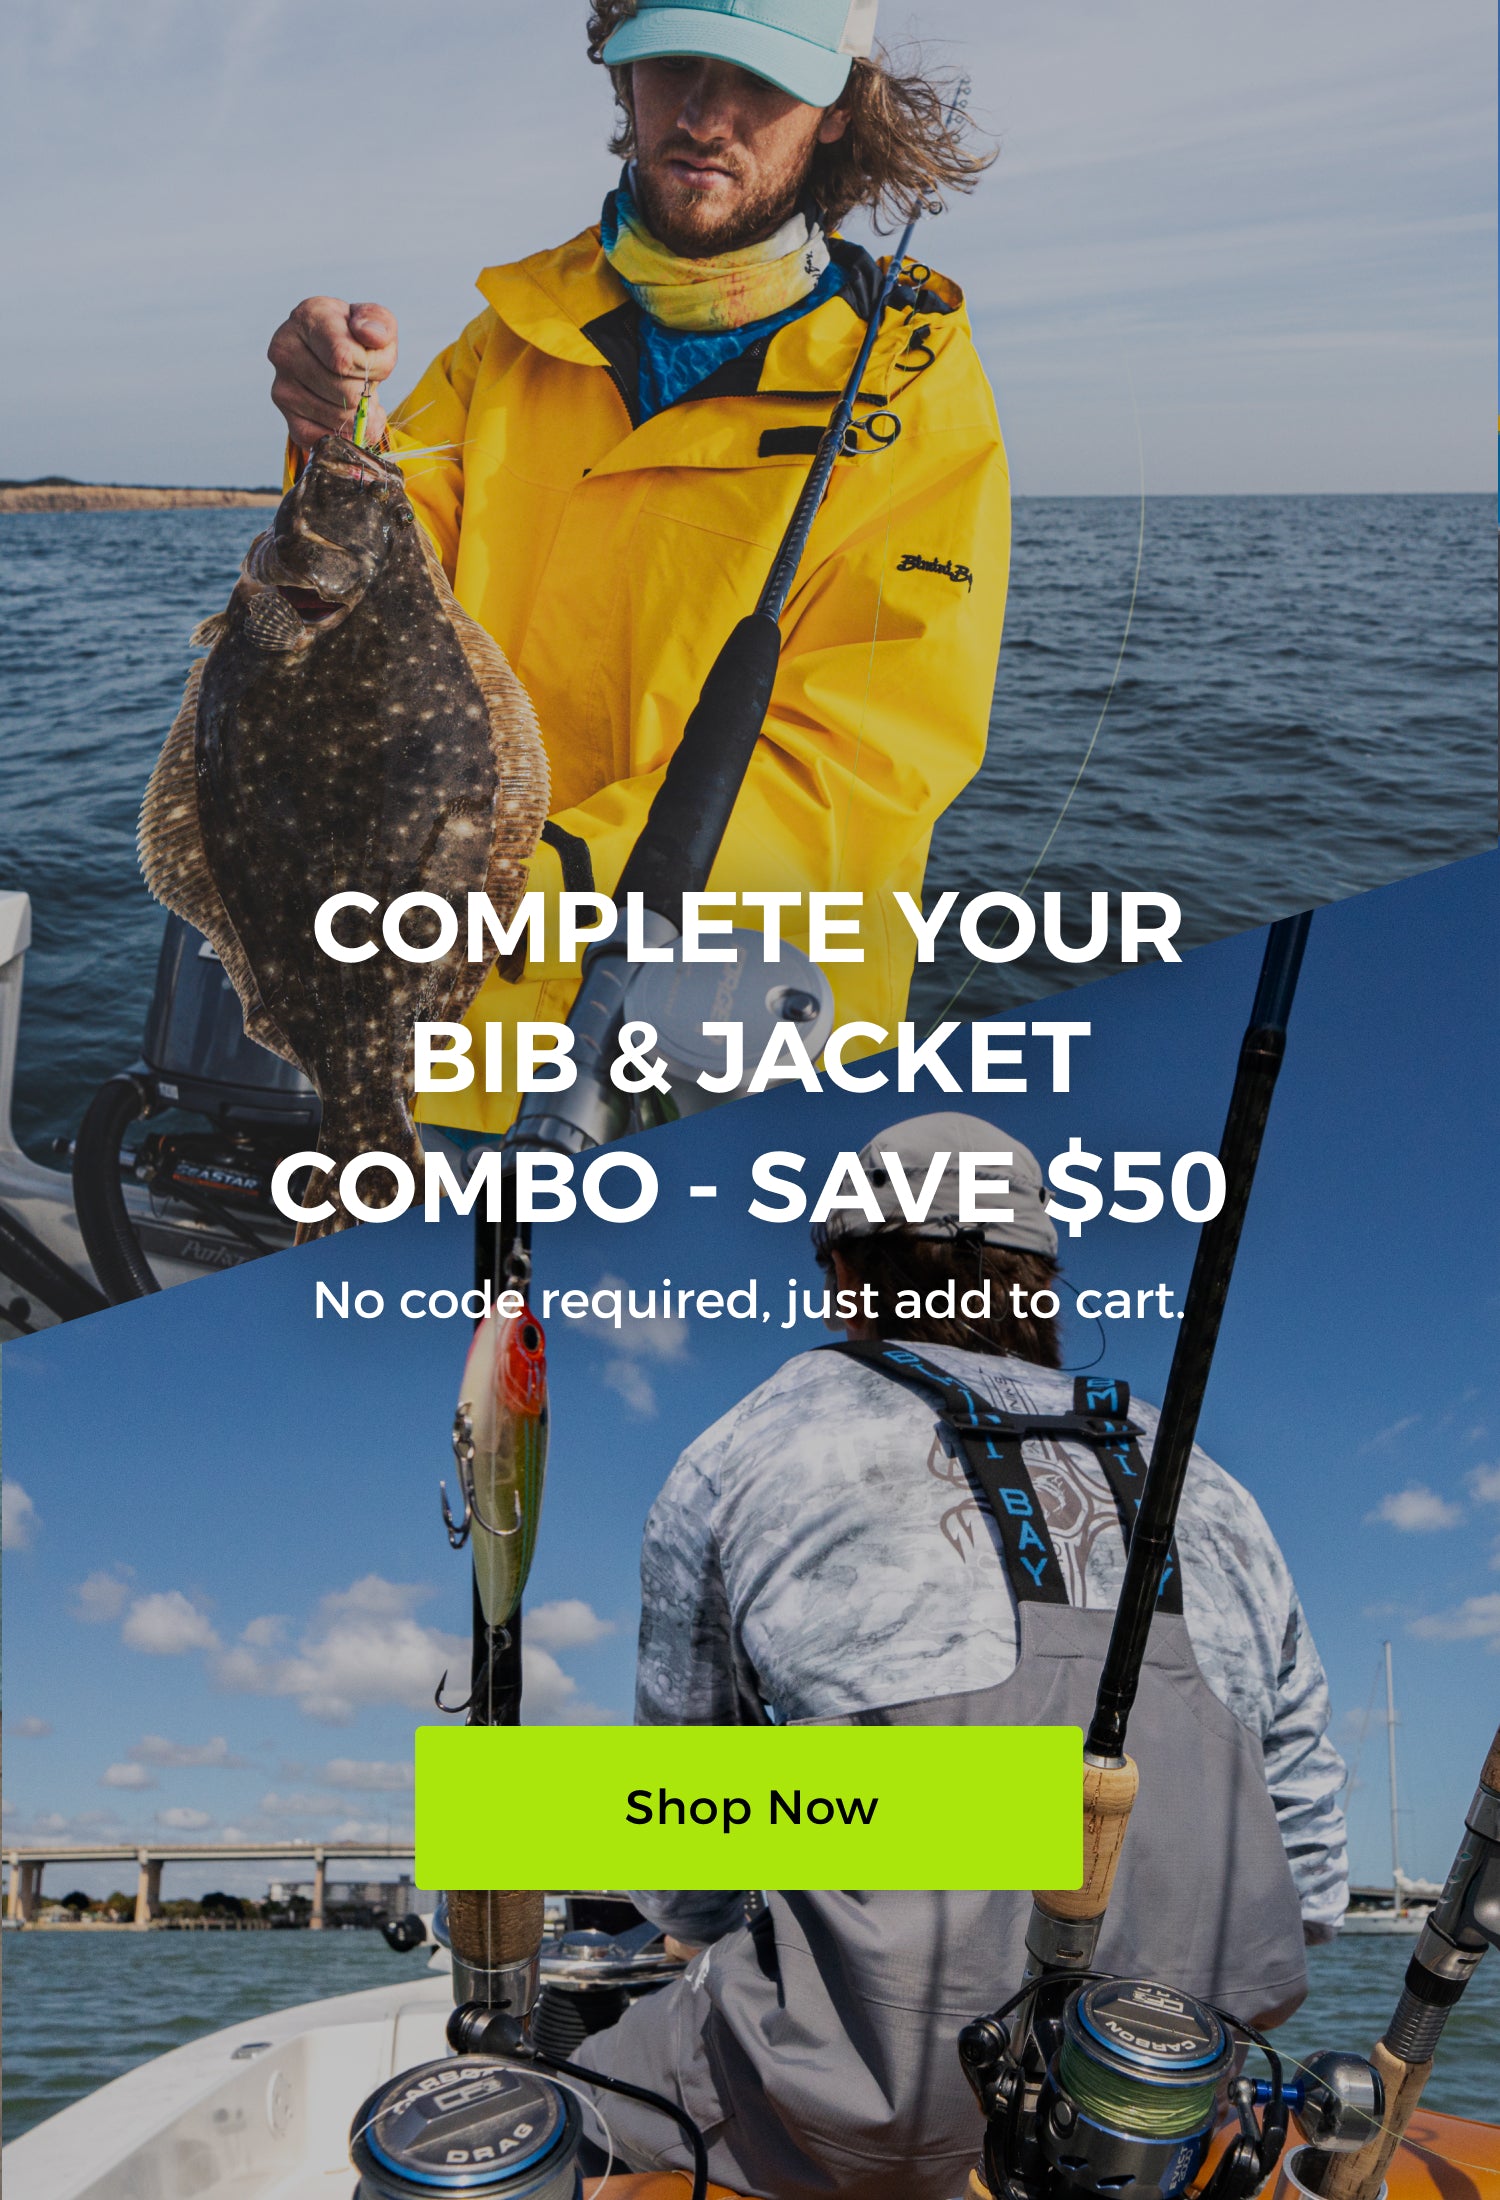 13 Fishing Official Store Sale: Shop Fishing Gear At Discounted